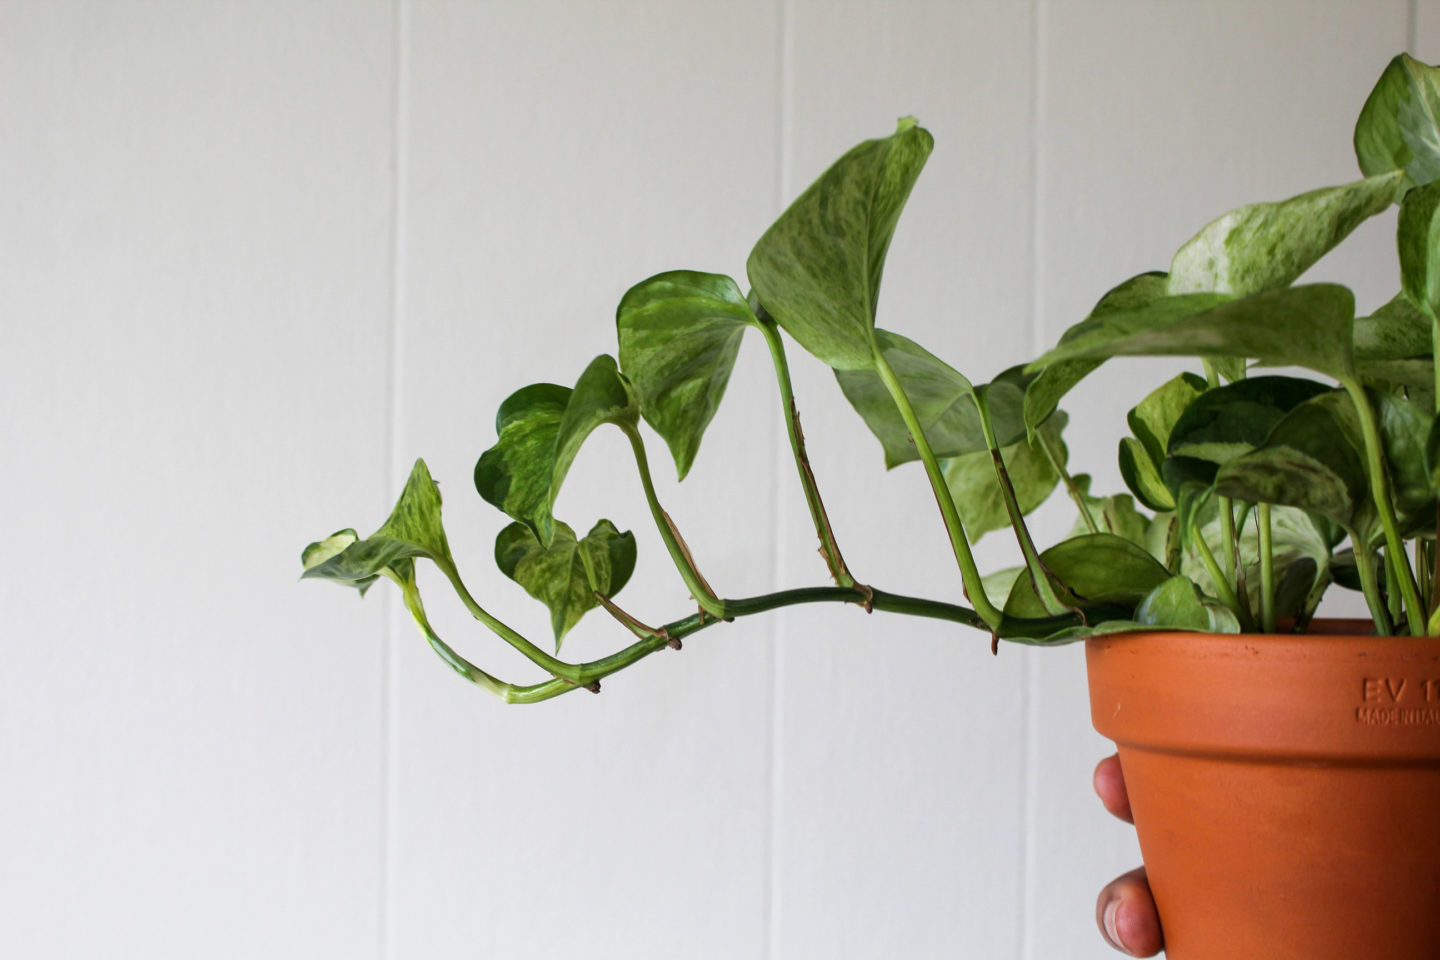 House plants for Beginners: The pothos. One of the best houseplants for beginnners